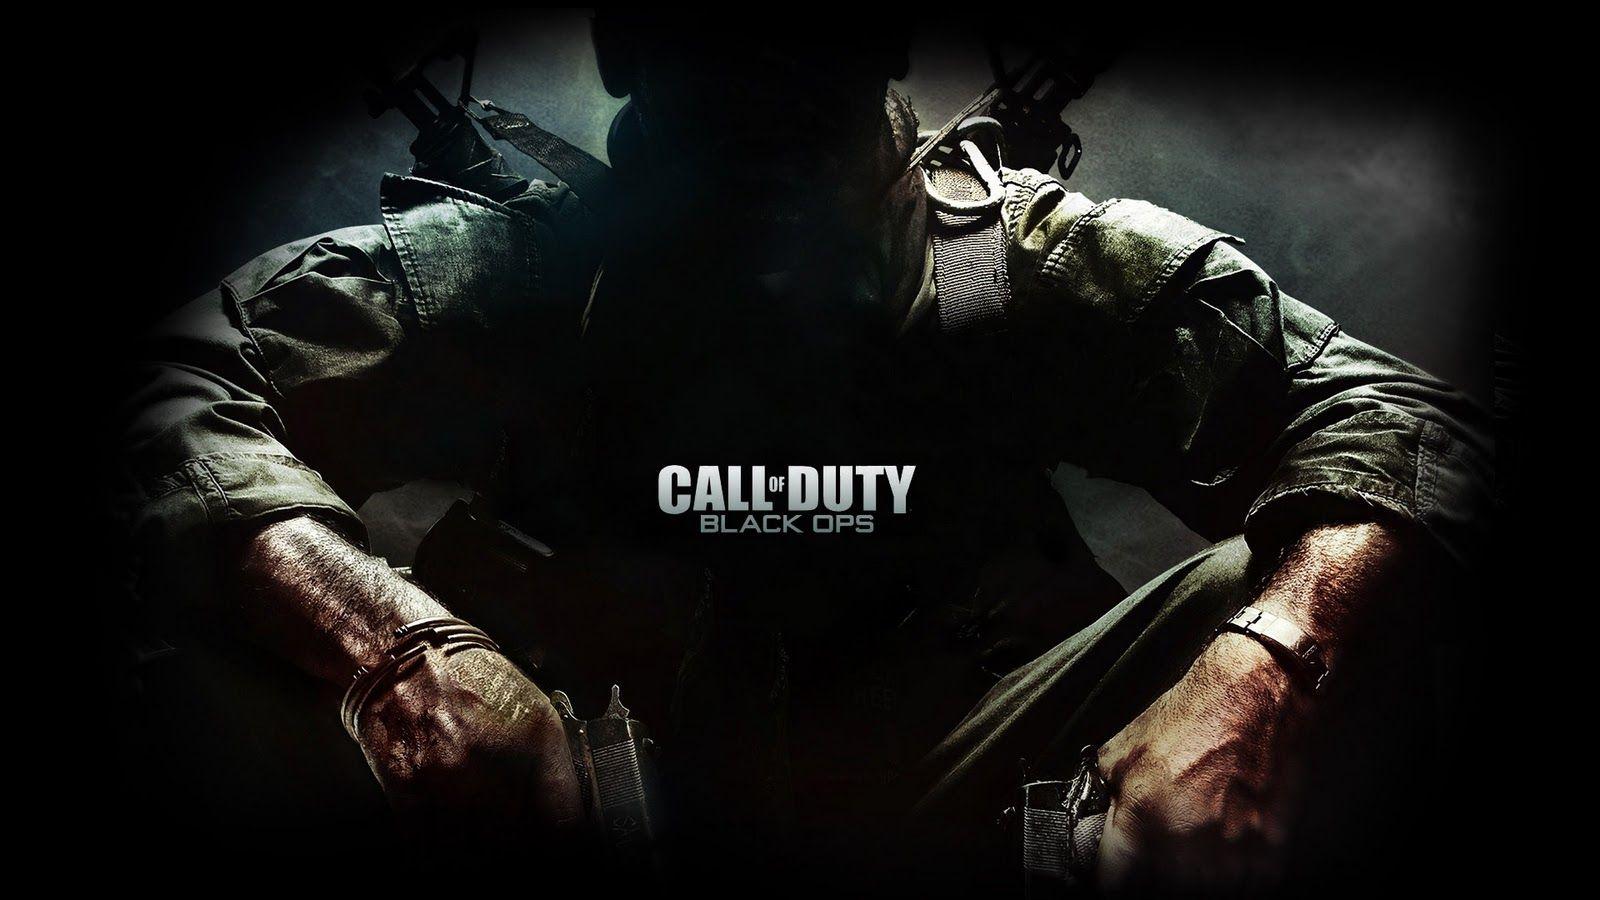 Black Ops 2 Full HD Wallpaper Picture Gallery